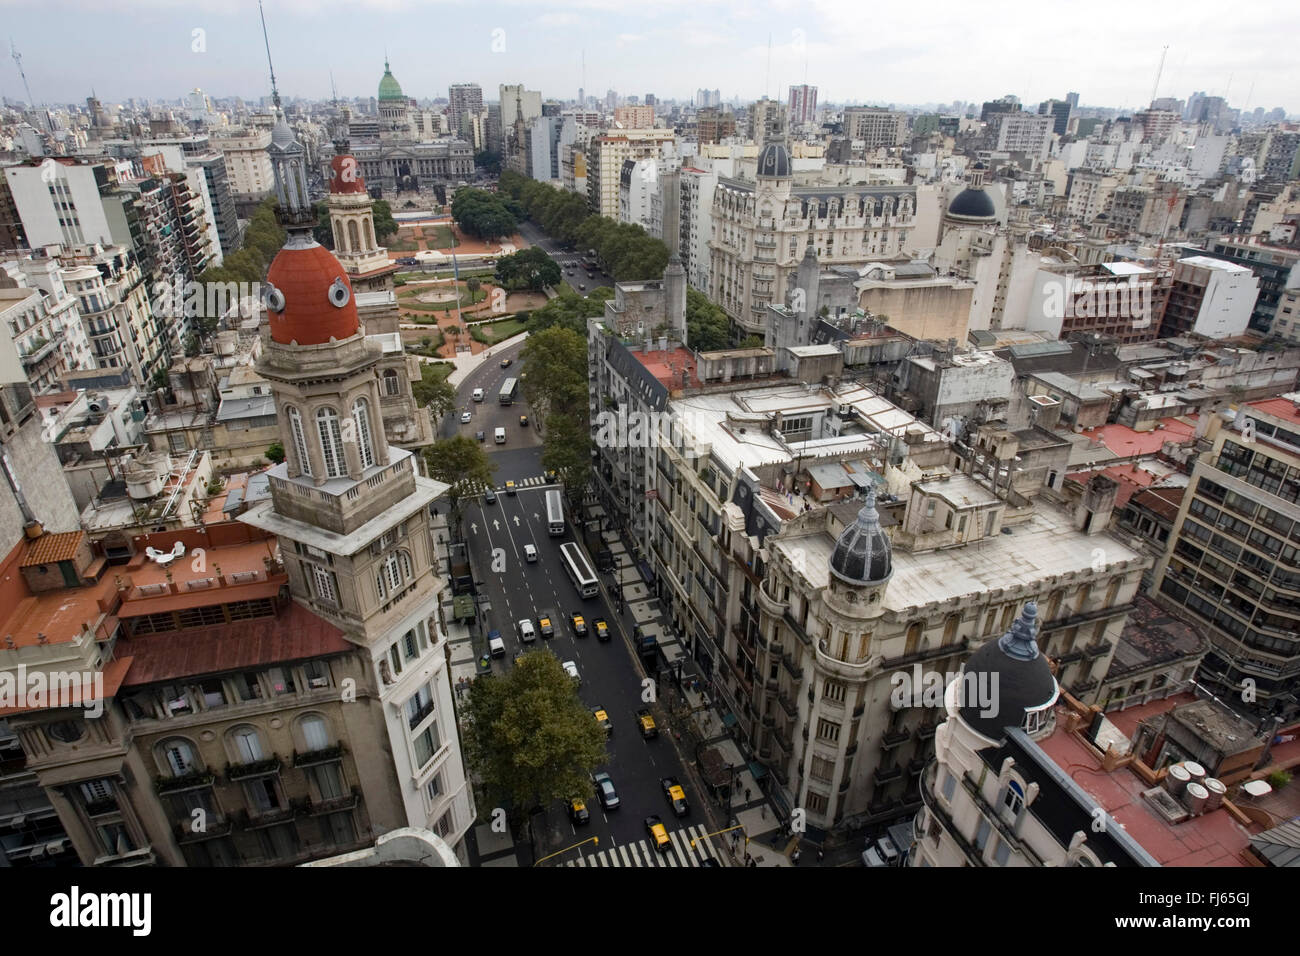 Plaza de Mayo and avenue with the congress building and surrounding from above, Argentina, Buenos Aires Stock Photo